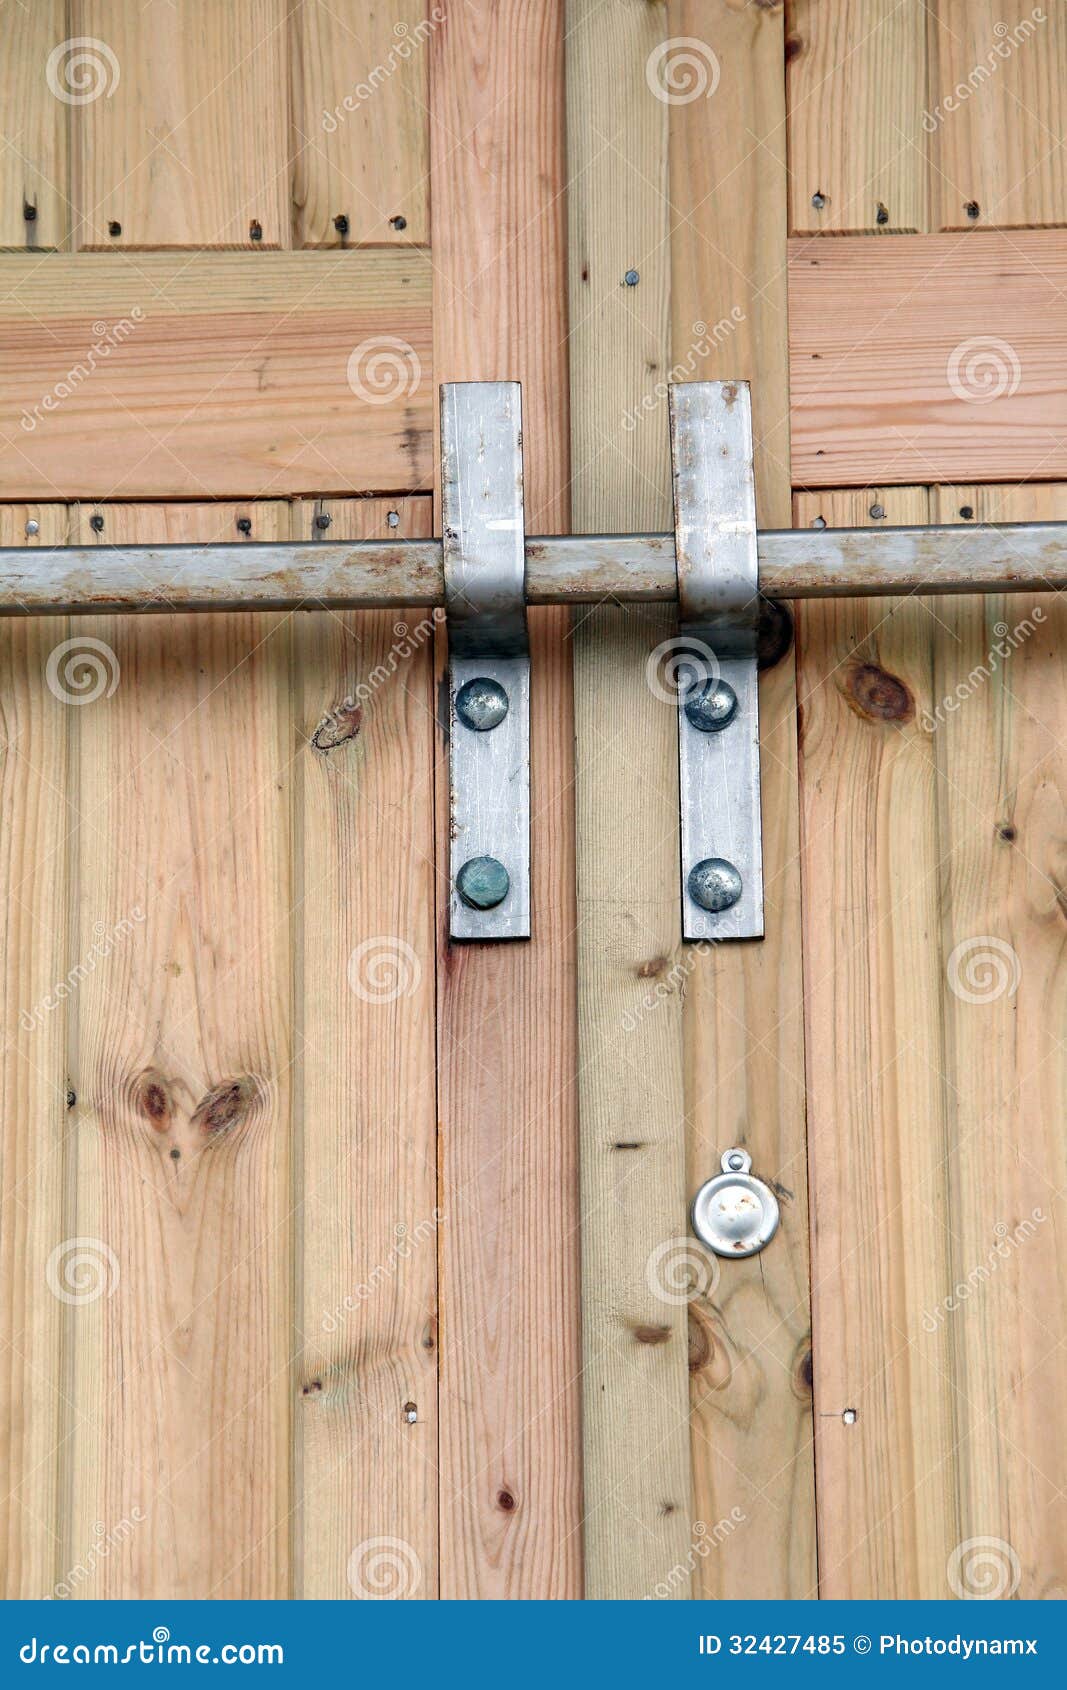 Security Bar On Shed Royalty Free Stock Photo - Image 